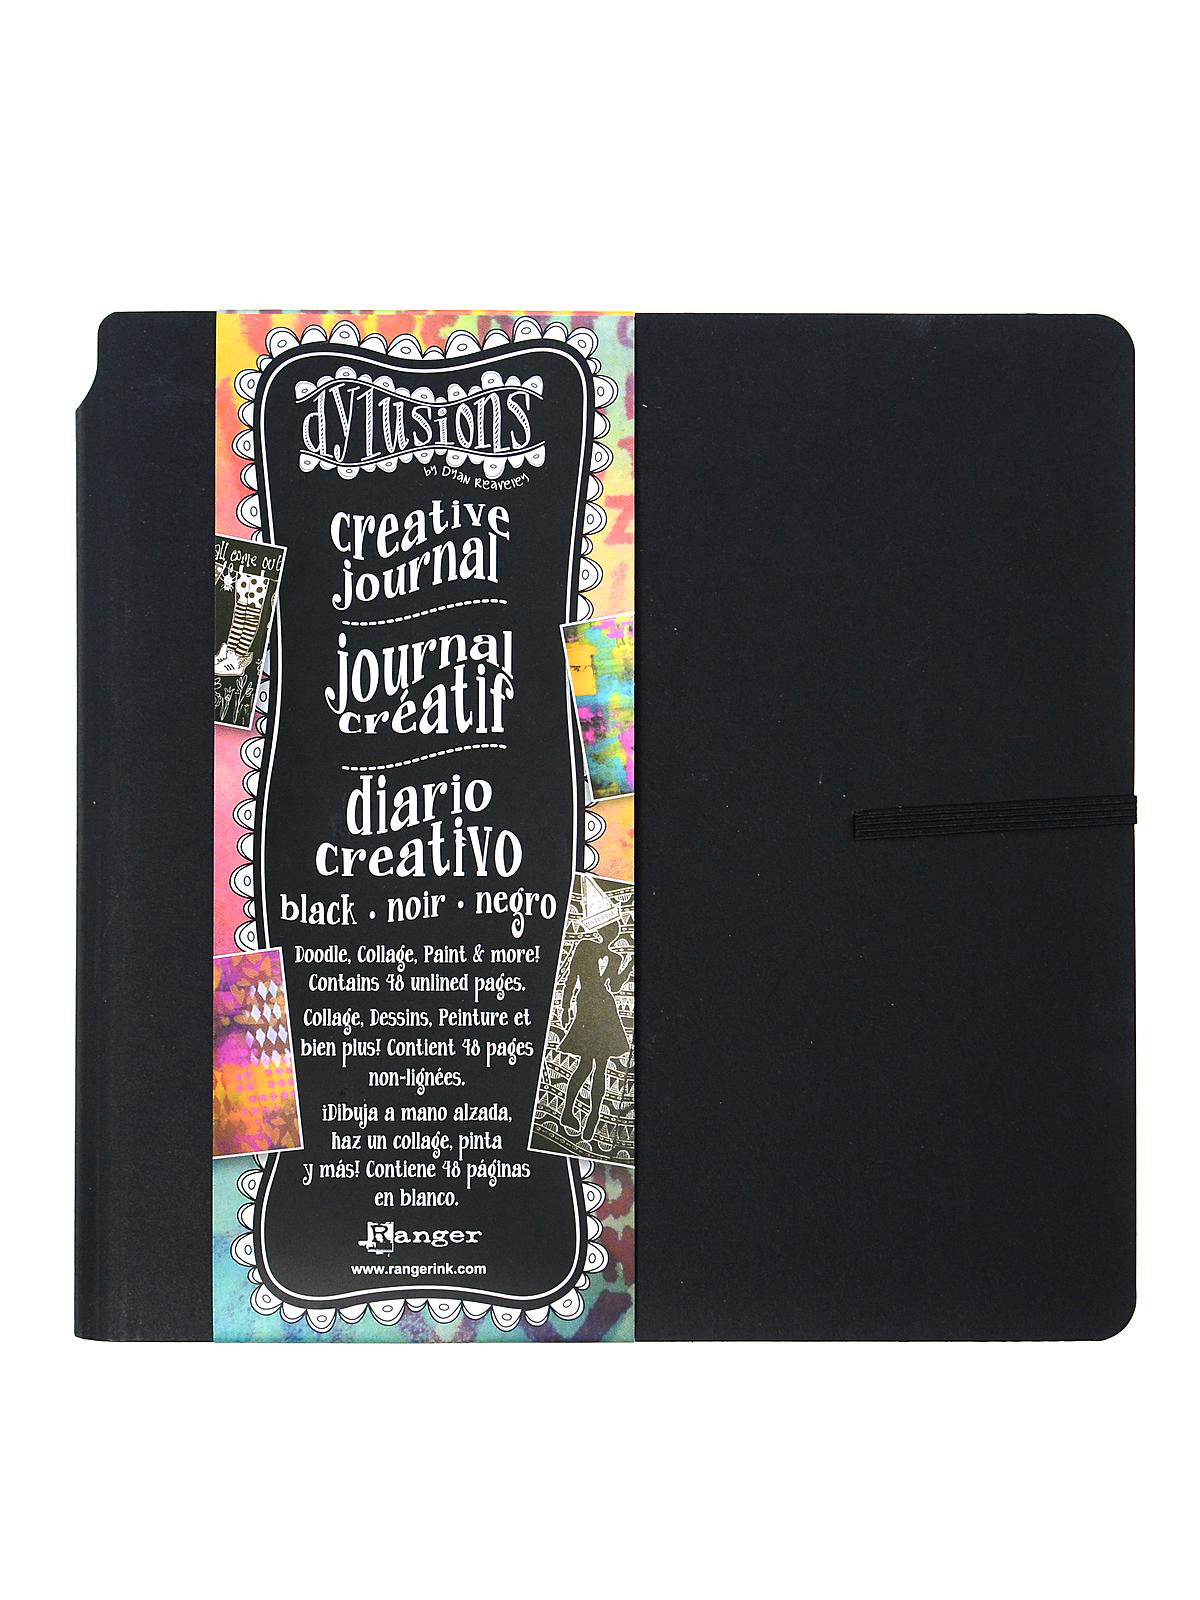 Dylusions Square Creative - 8 x 8 Black Journal, Paint Pens & Insert Pages